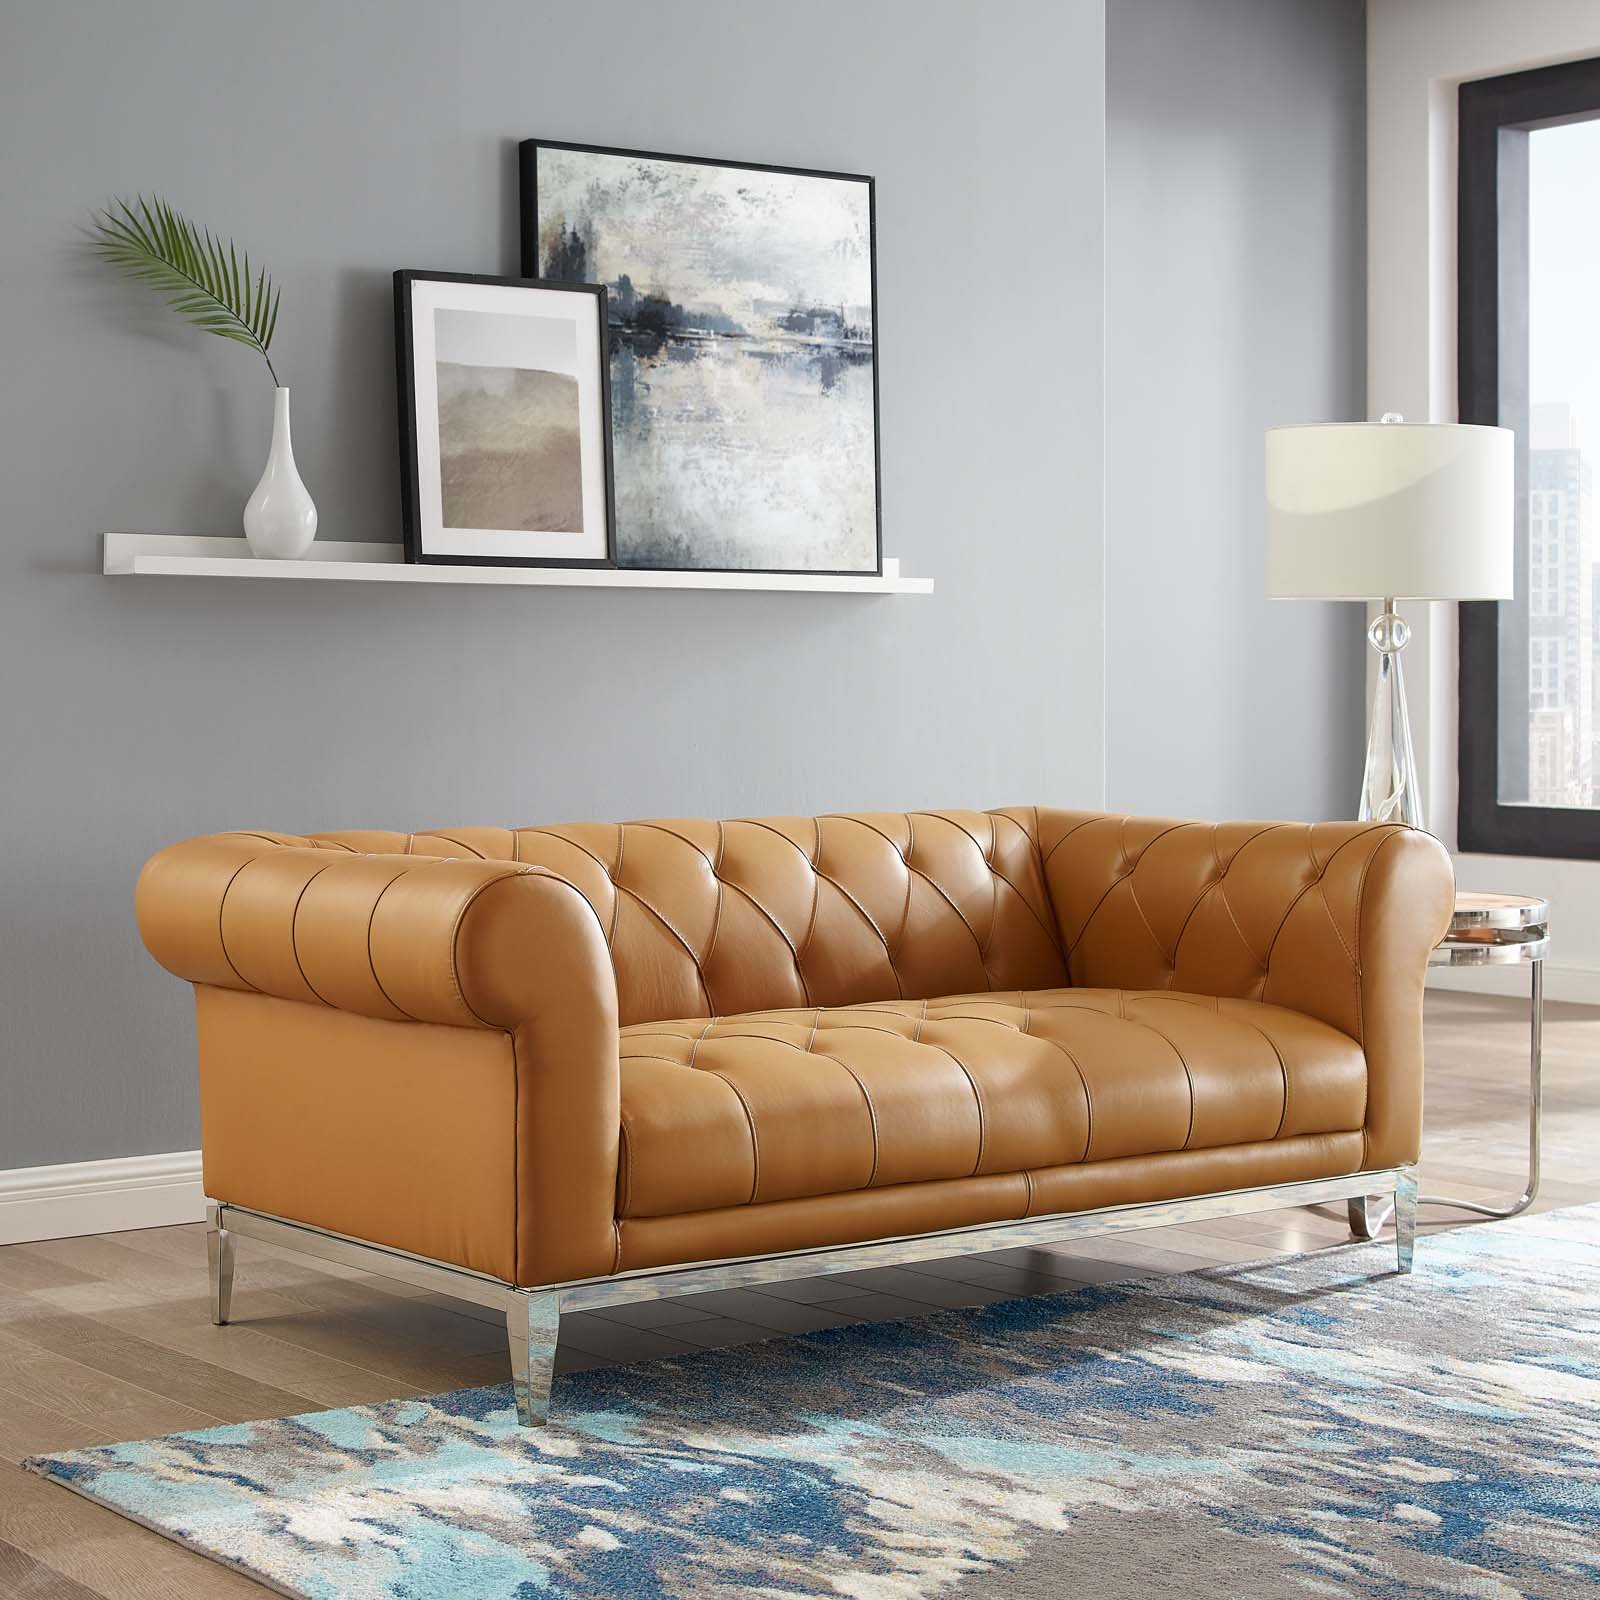 On Tufted Leather Upholstered Tan, Tan Leather Loveseat